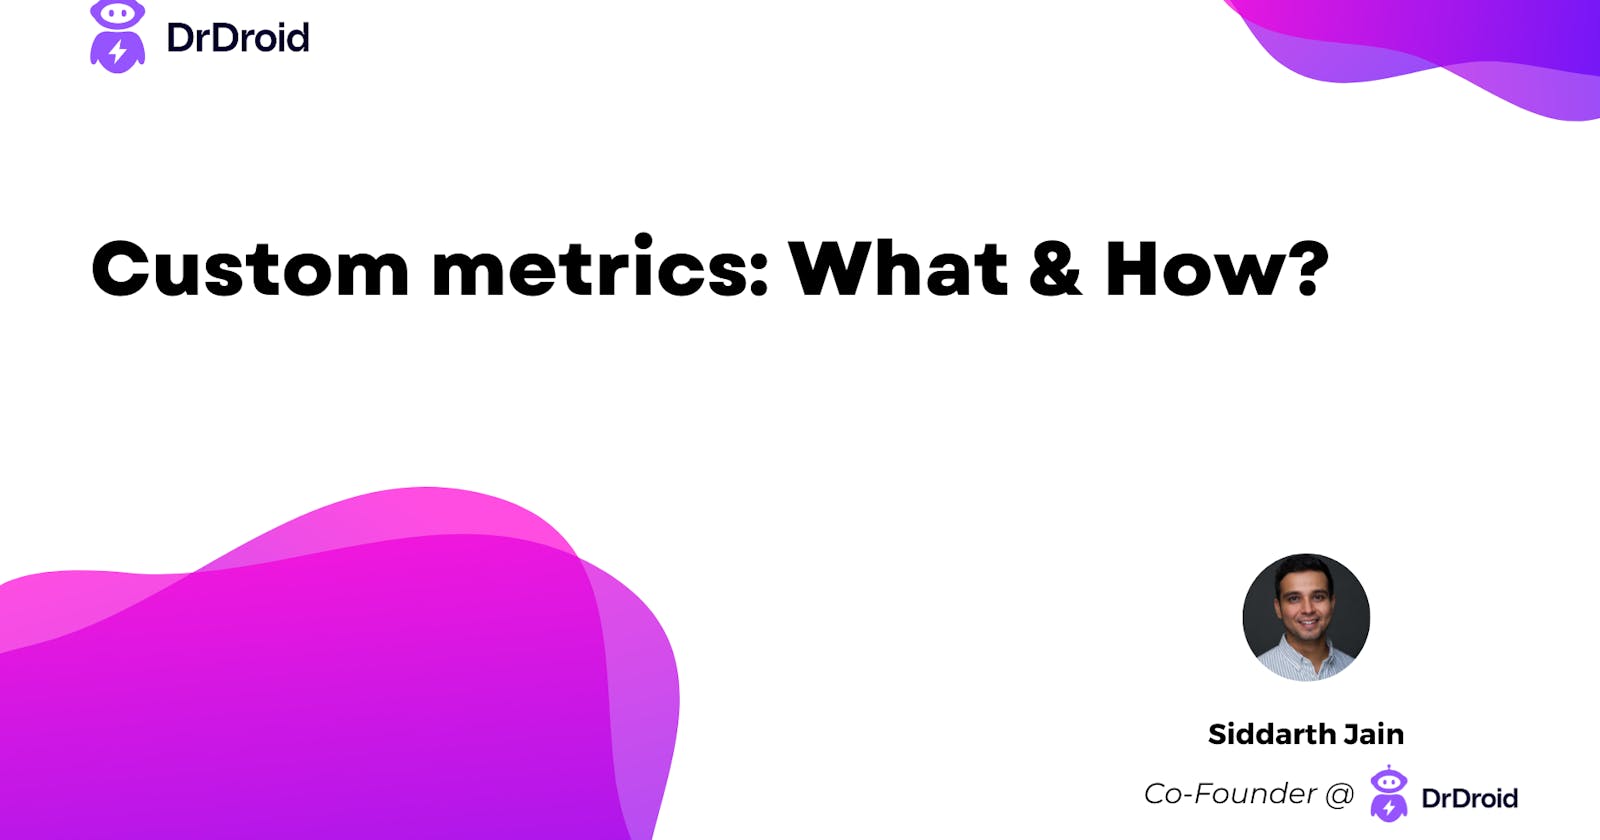 What are custom metrics & How to track them with Doctor Droid?